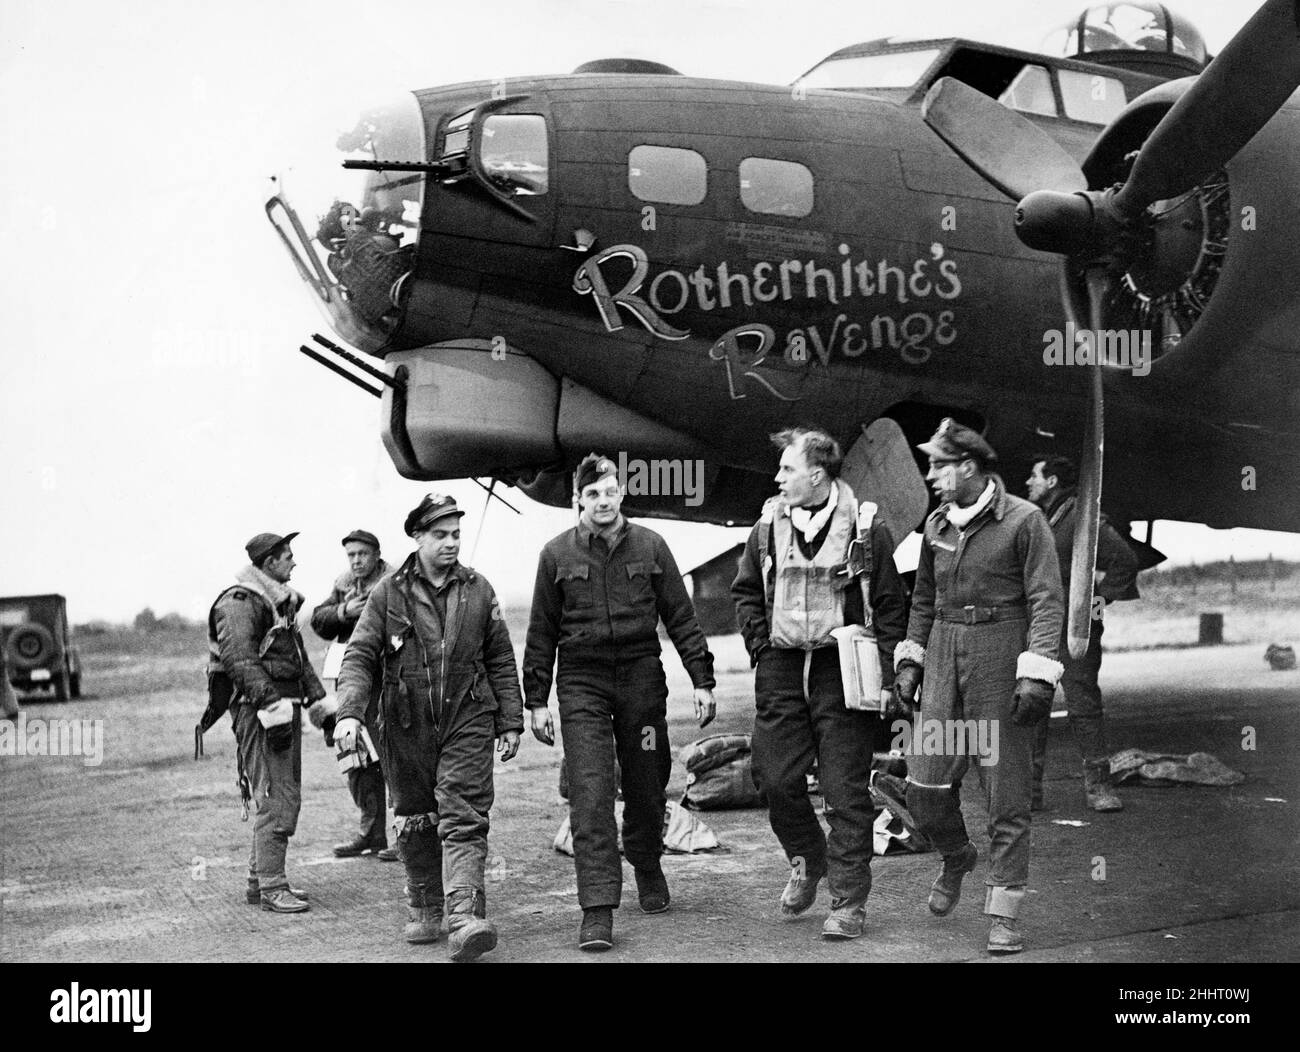 American crew members of the 381st Bomb Group return to a Bomber station of the U.S. Air Force , somewhere in England after leading a flight to Berlin in their B-17 Flying Fortress plane (serial number 42-31761) nicknamed 'Rotherhithe's Revenge'.  As an appreciation of £800,000 raised during Bermondsey's Wings for Victory Week, the people of Bermondsey christened the bomber 'Rotherhithe Revenge'.  Three other bombers were named by their crews also in honour of Bermondsey. March 1944. Stock Photo